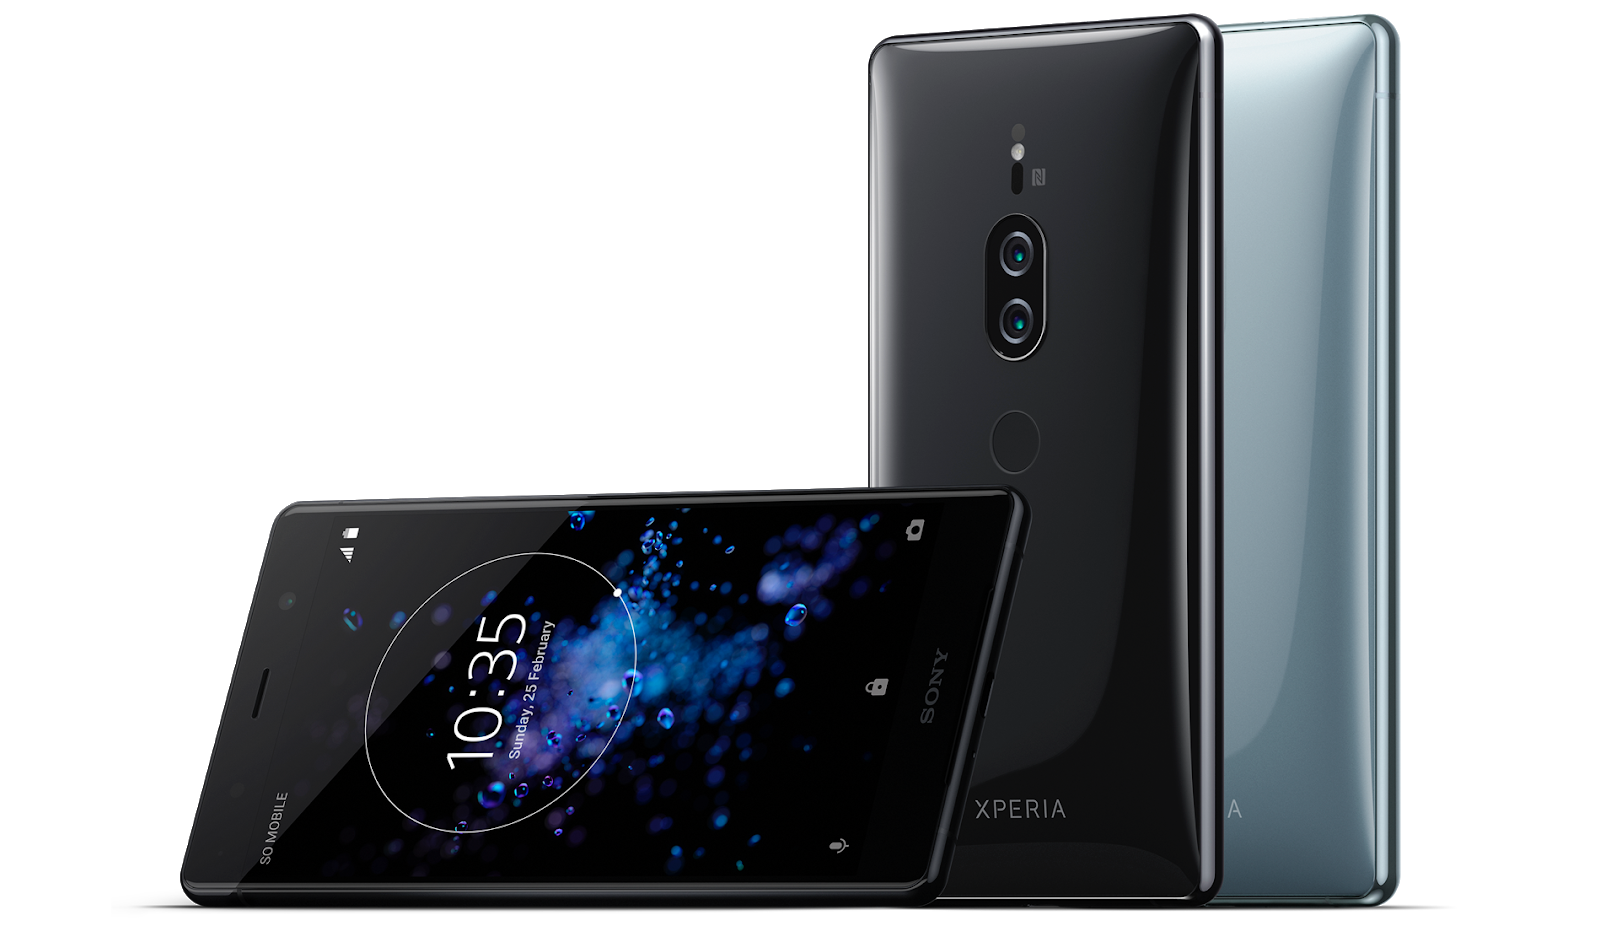 Sony Xperia XZ2 Premium with 4K HDR Display, Dual Rear Camera launched